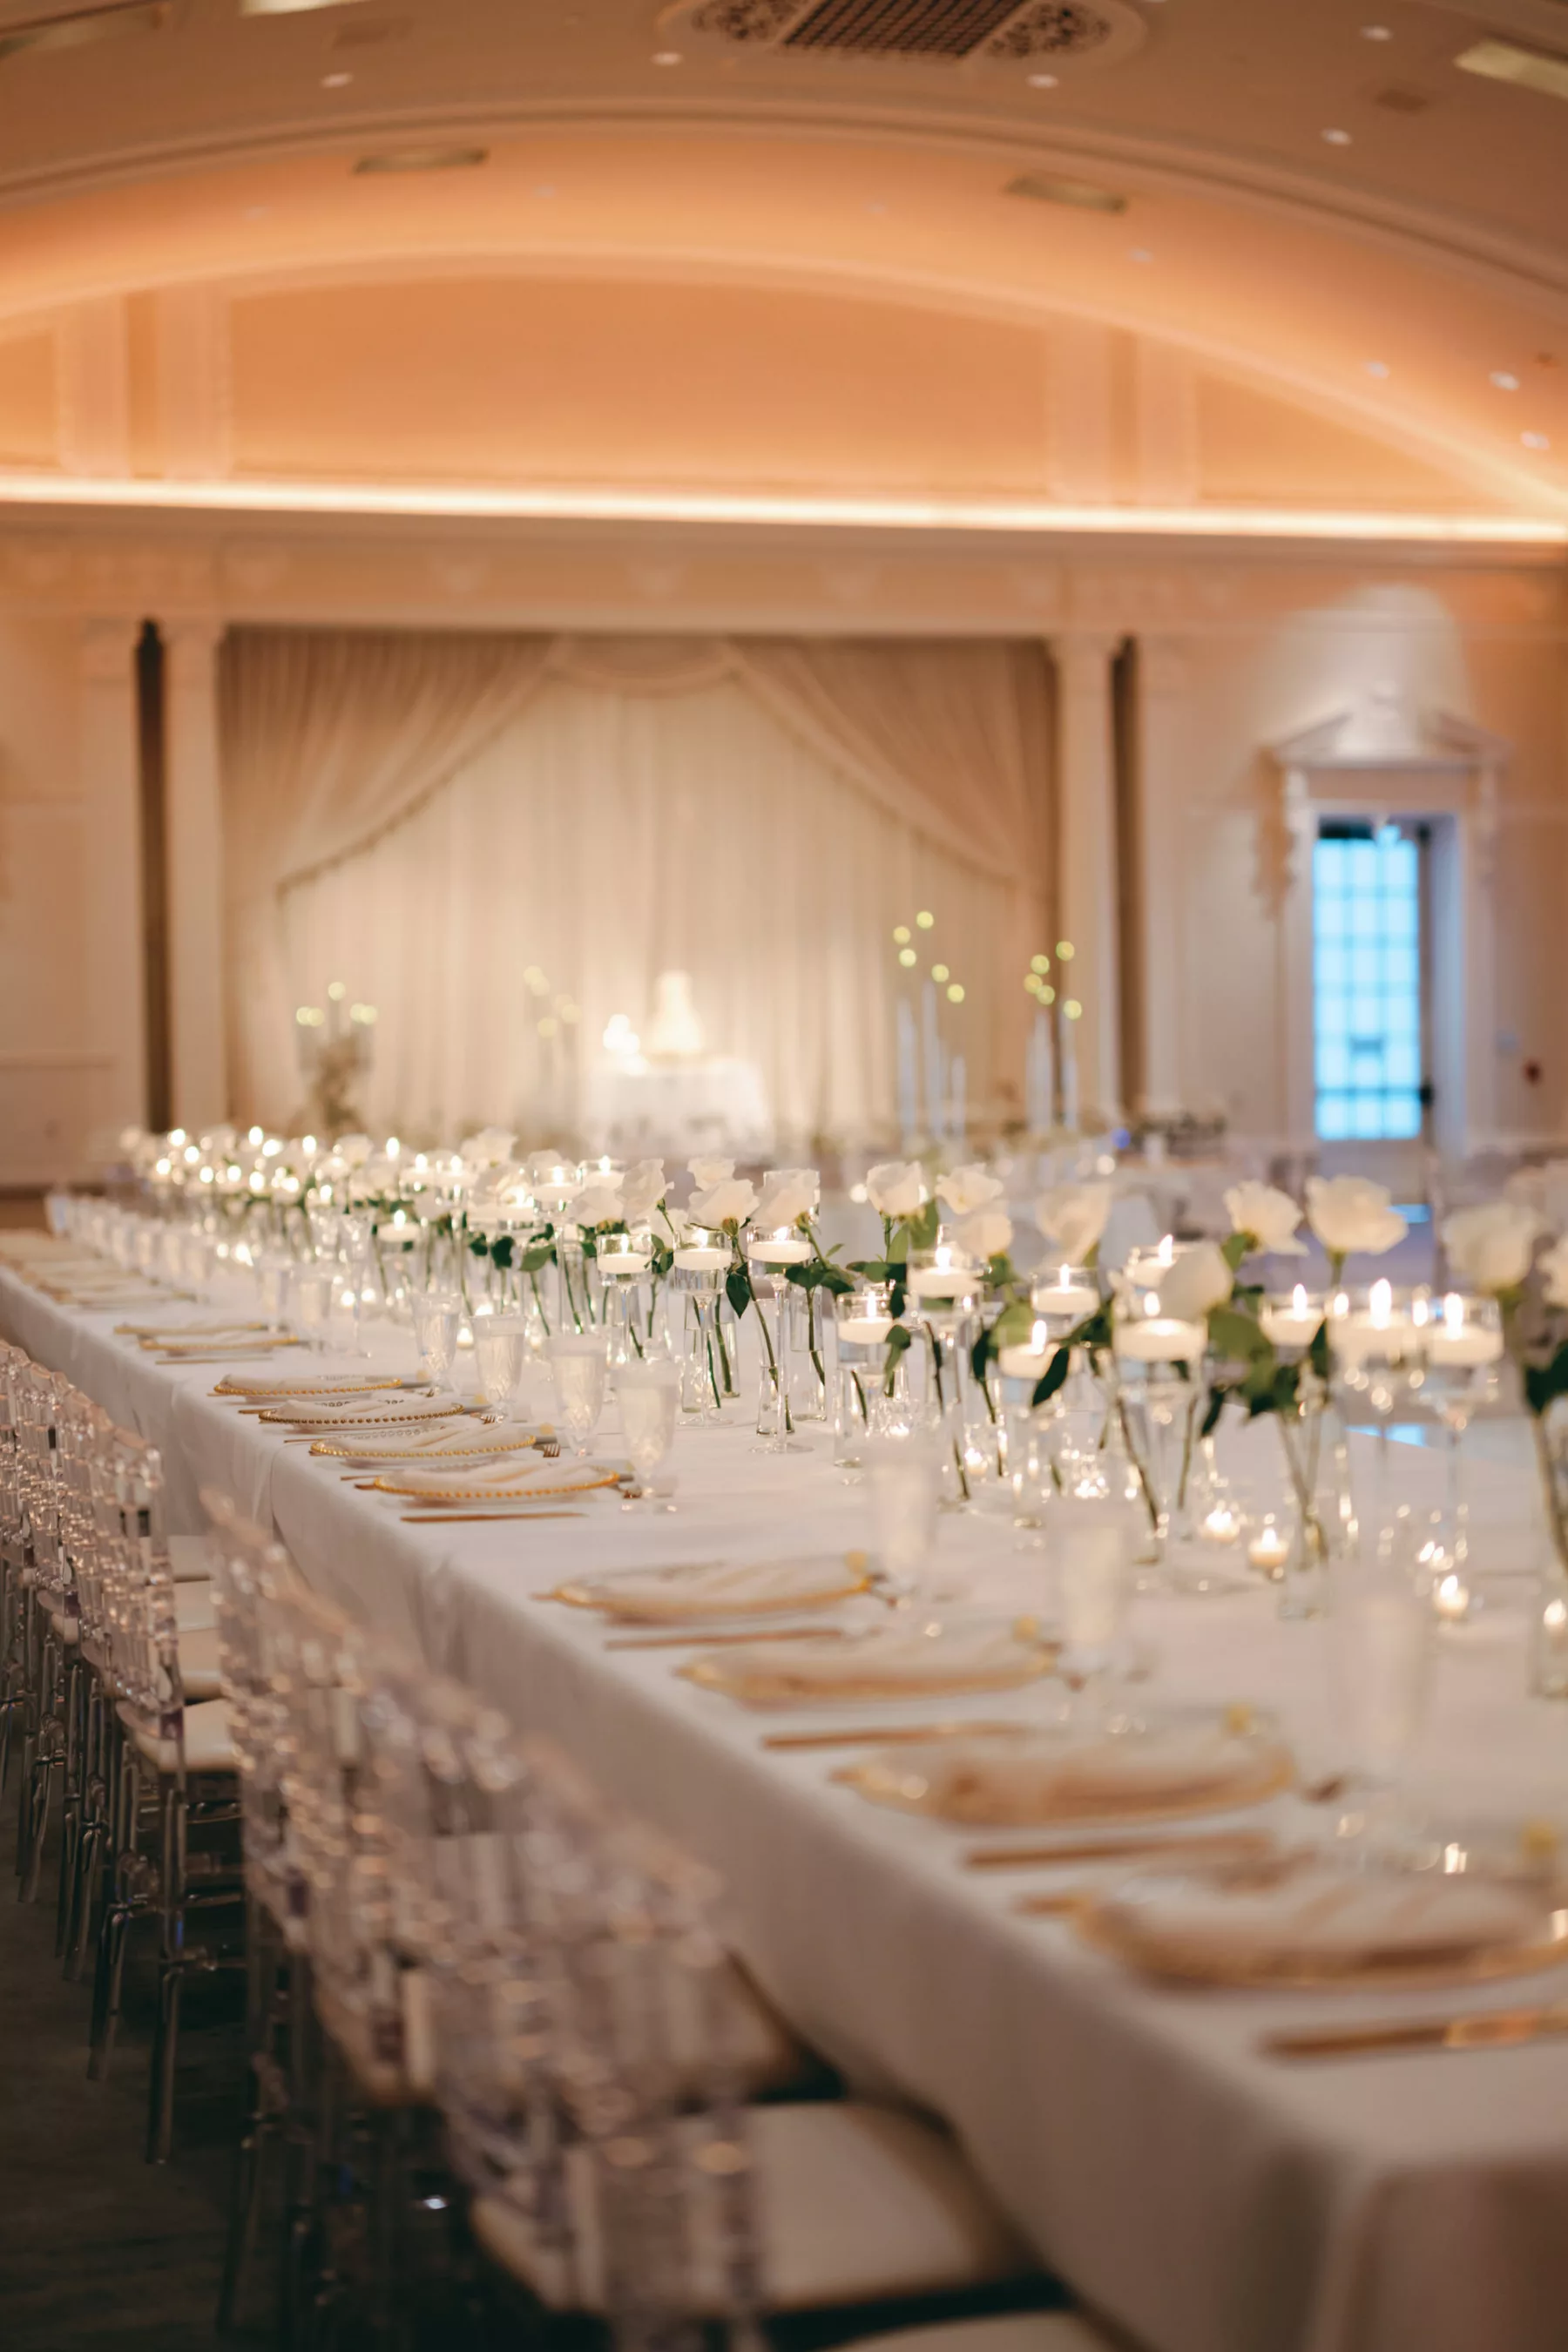 Timeless Monochromatic Wedding Reception Ideas | Romantic Centerpiece Decor Inspiration | Feasting Tables | Floating Candles, Tea Lights, and Individual White Roses in Tall Bud Vases | Tampa Bay Event Venue The Vinoy